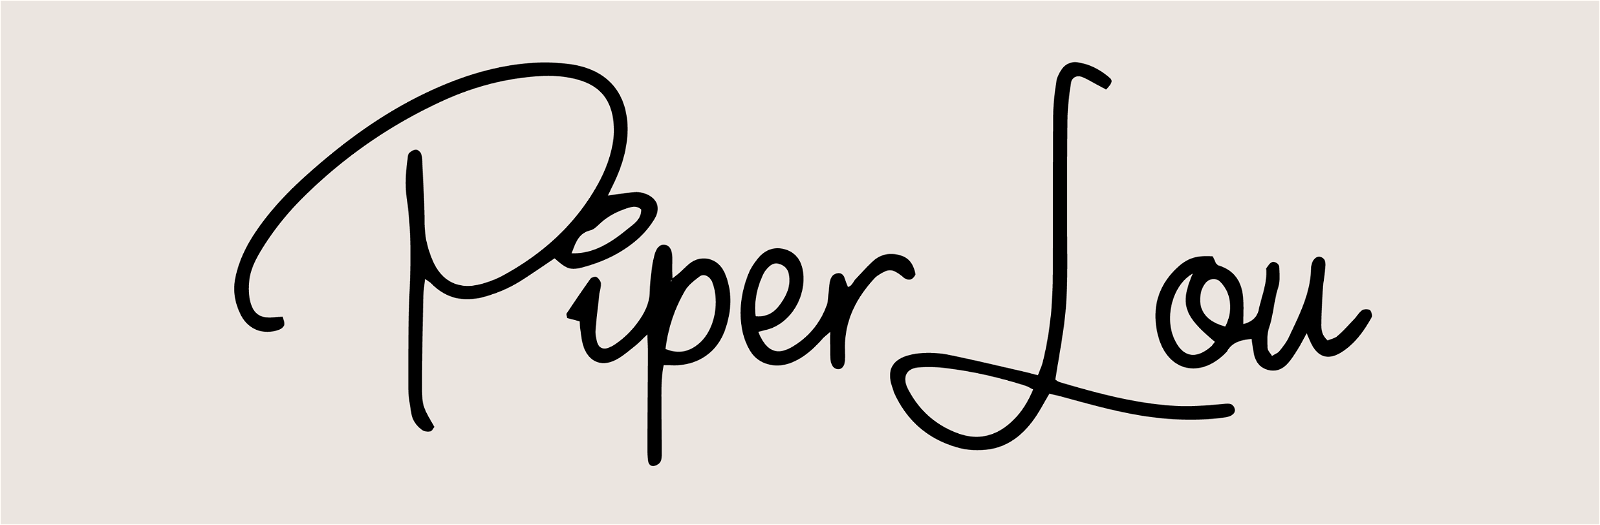 Sleek Almond colored background with the Black Piper Lou logo